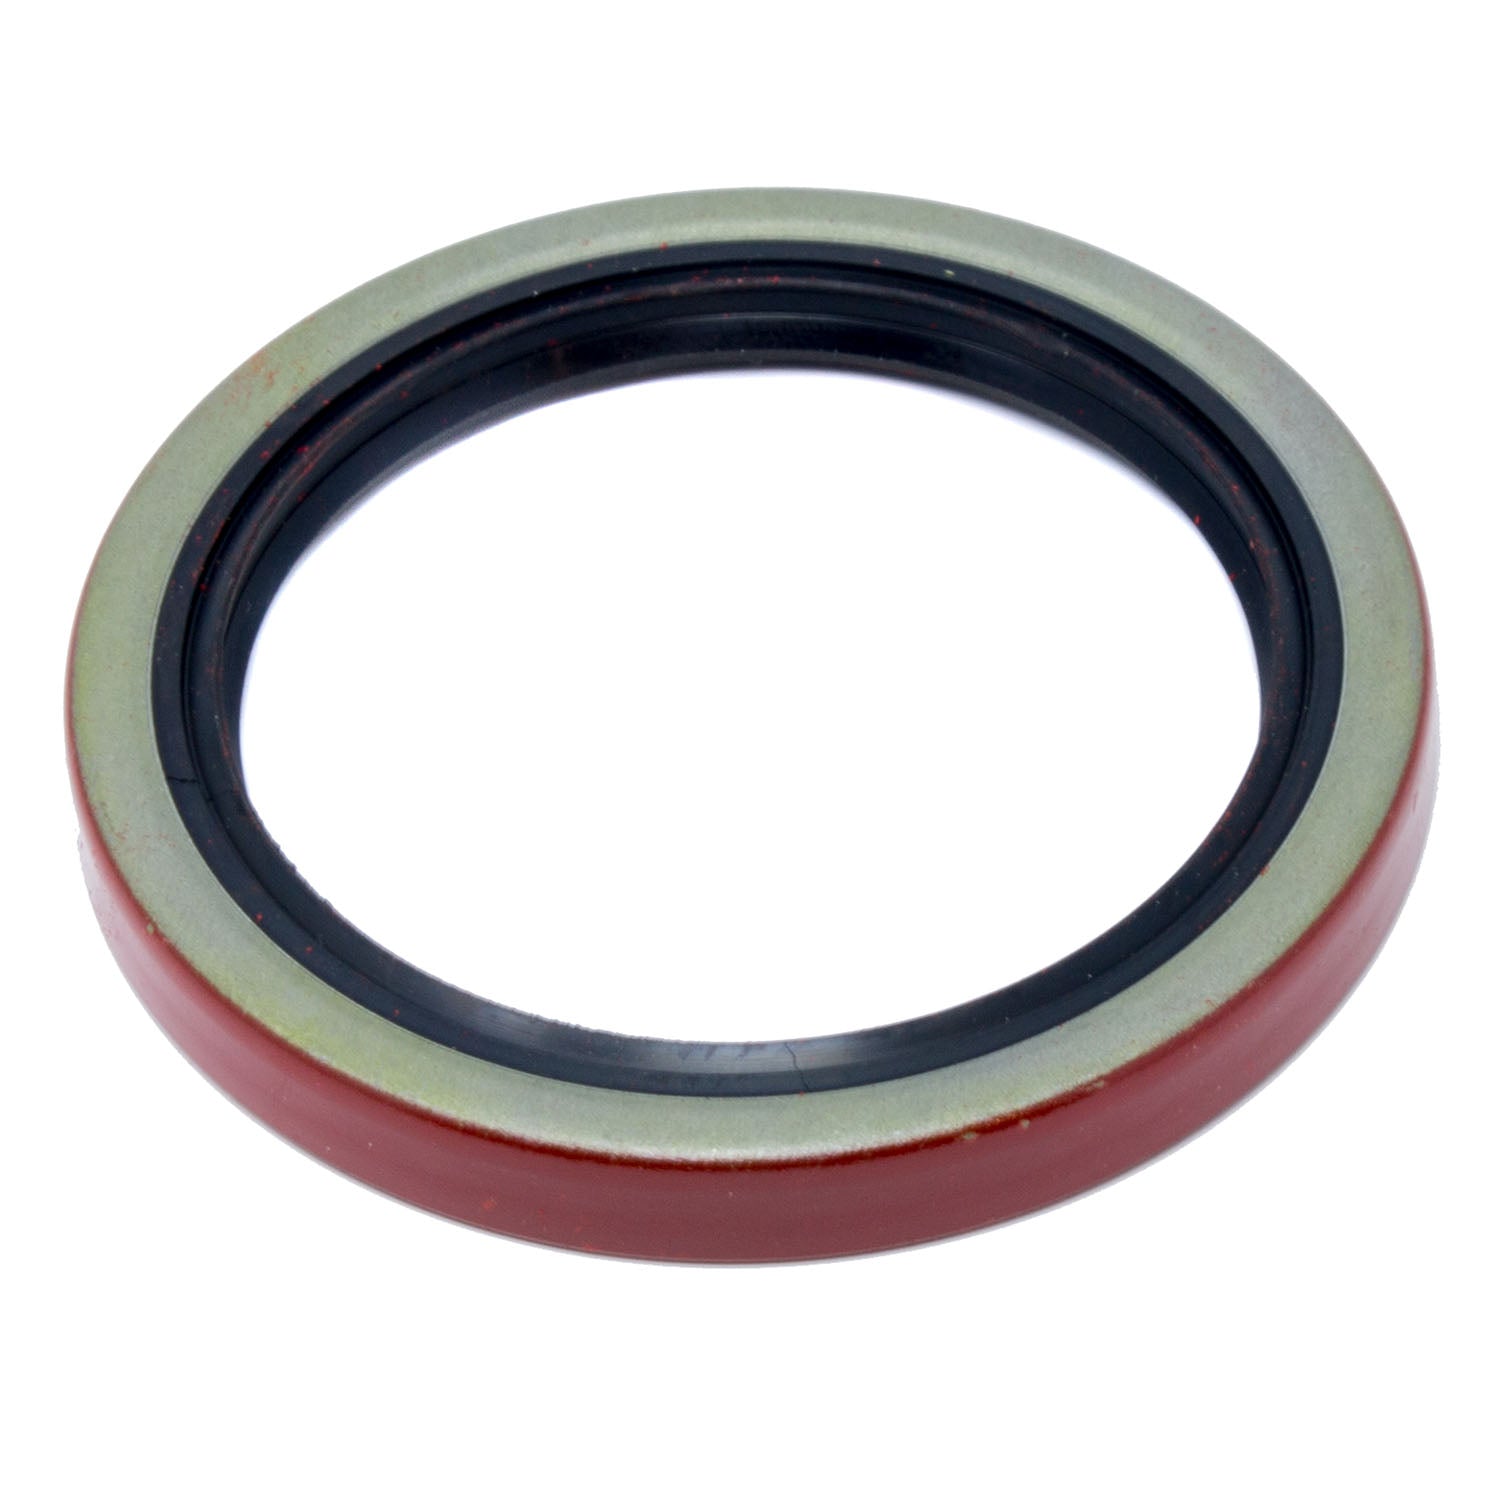 Duraforce 6658228, Axle Oil Seal For Bobcat